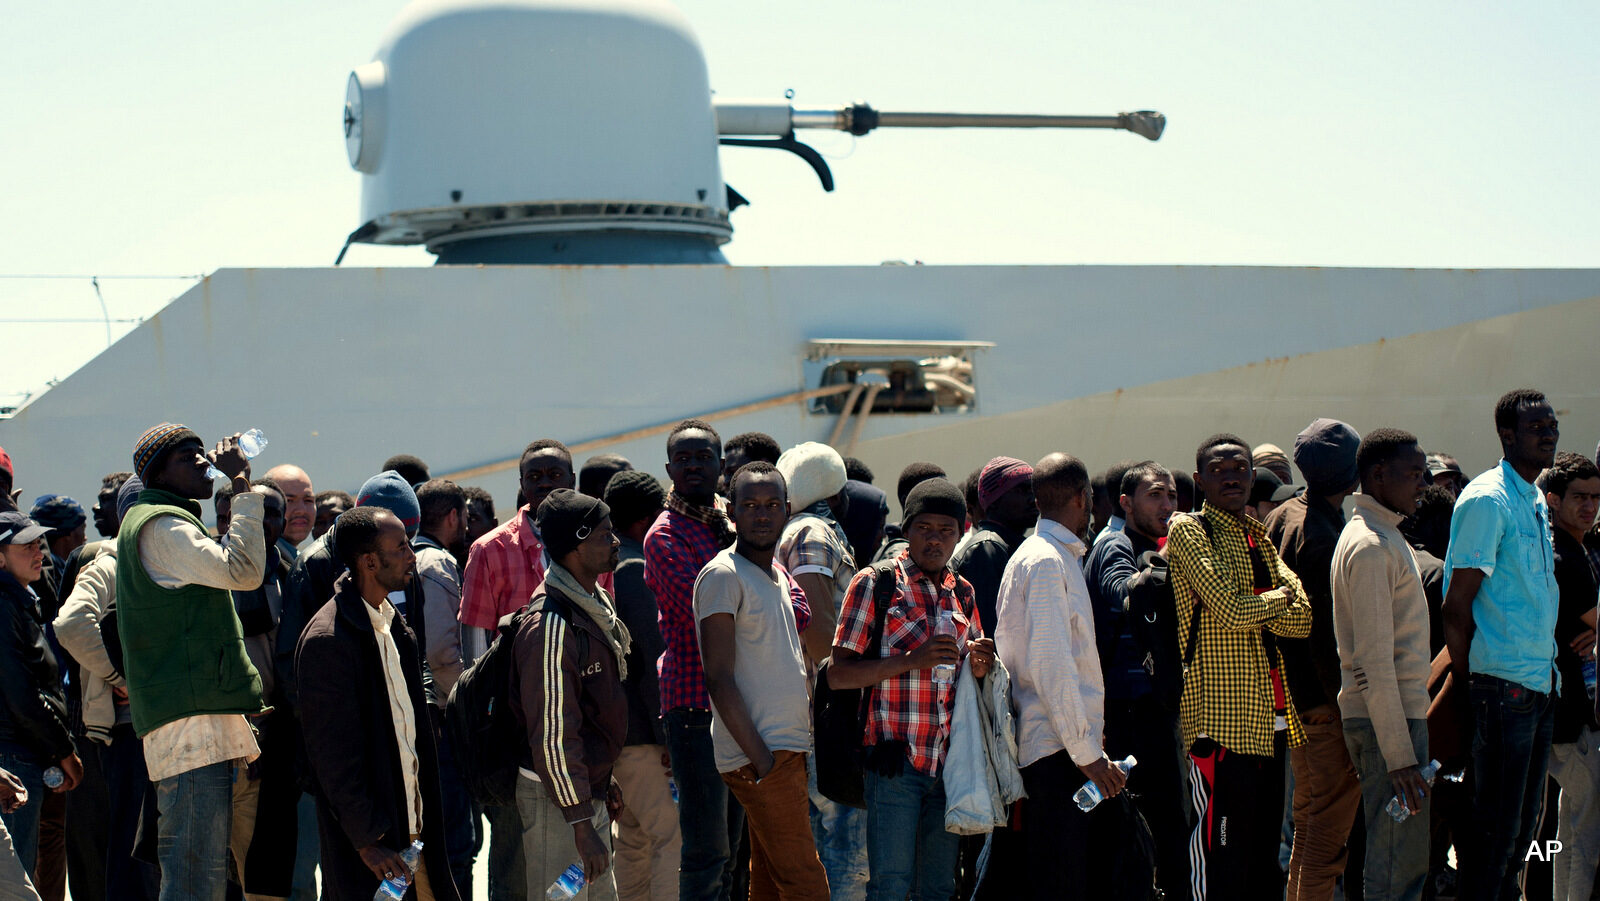 Rescued migrants line up after disembarking from the Italian Navy vessel "Bettica" in the harbor of Augusta, Sicily, southern Italy, Wednesday, April 22, 2015. Italy pressed the European Union on Wednesday to devise concrete, robust steps to stop the deadly tide of migrants on smugglers' boats in the Mediterranean, including setting up refugee camps in countries bordering Libya. Italian Defense Minister Roberta Pinotti also said human traffickers must be targeted with military intervention.